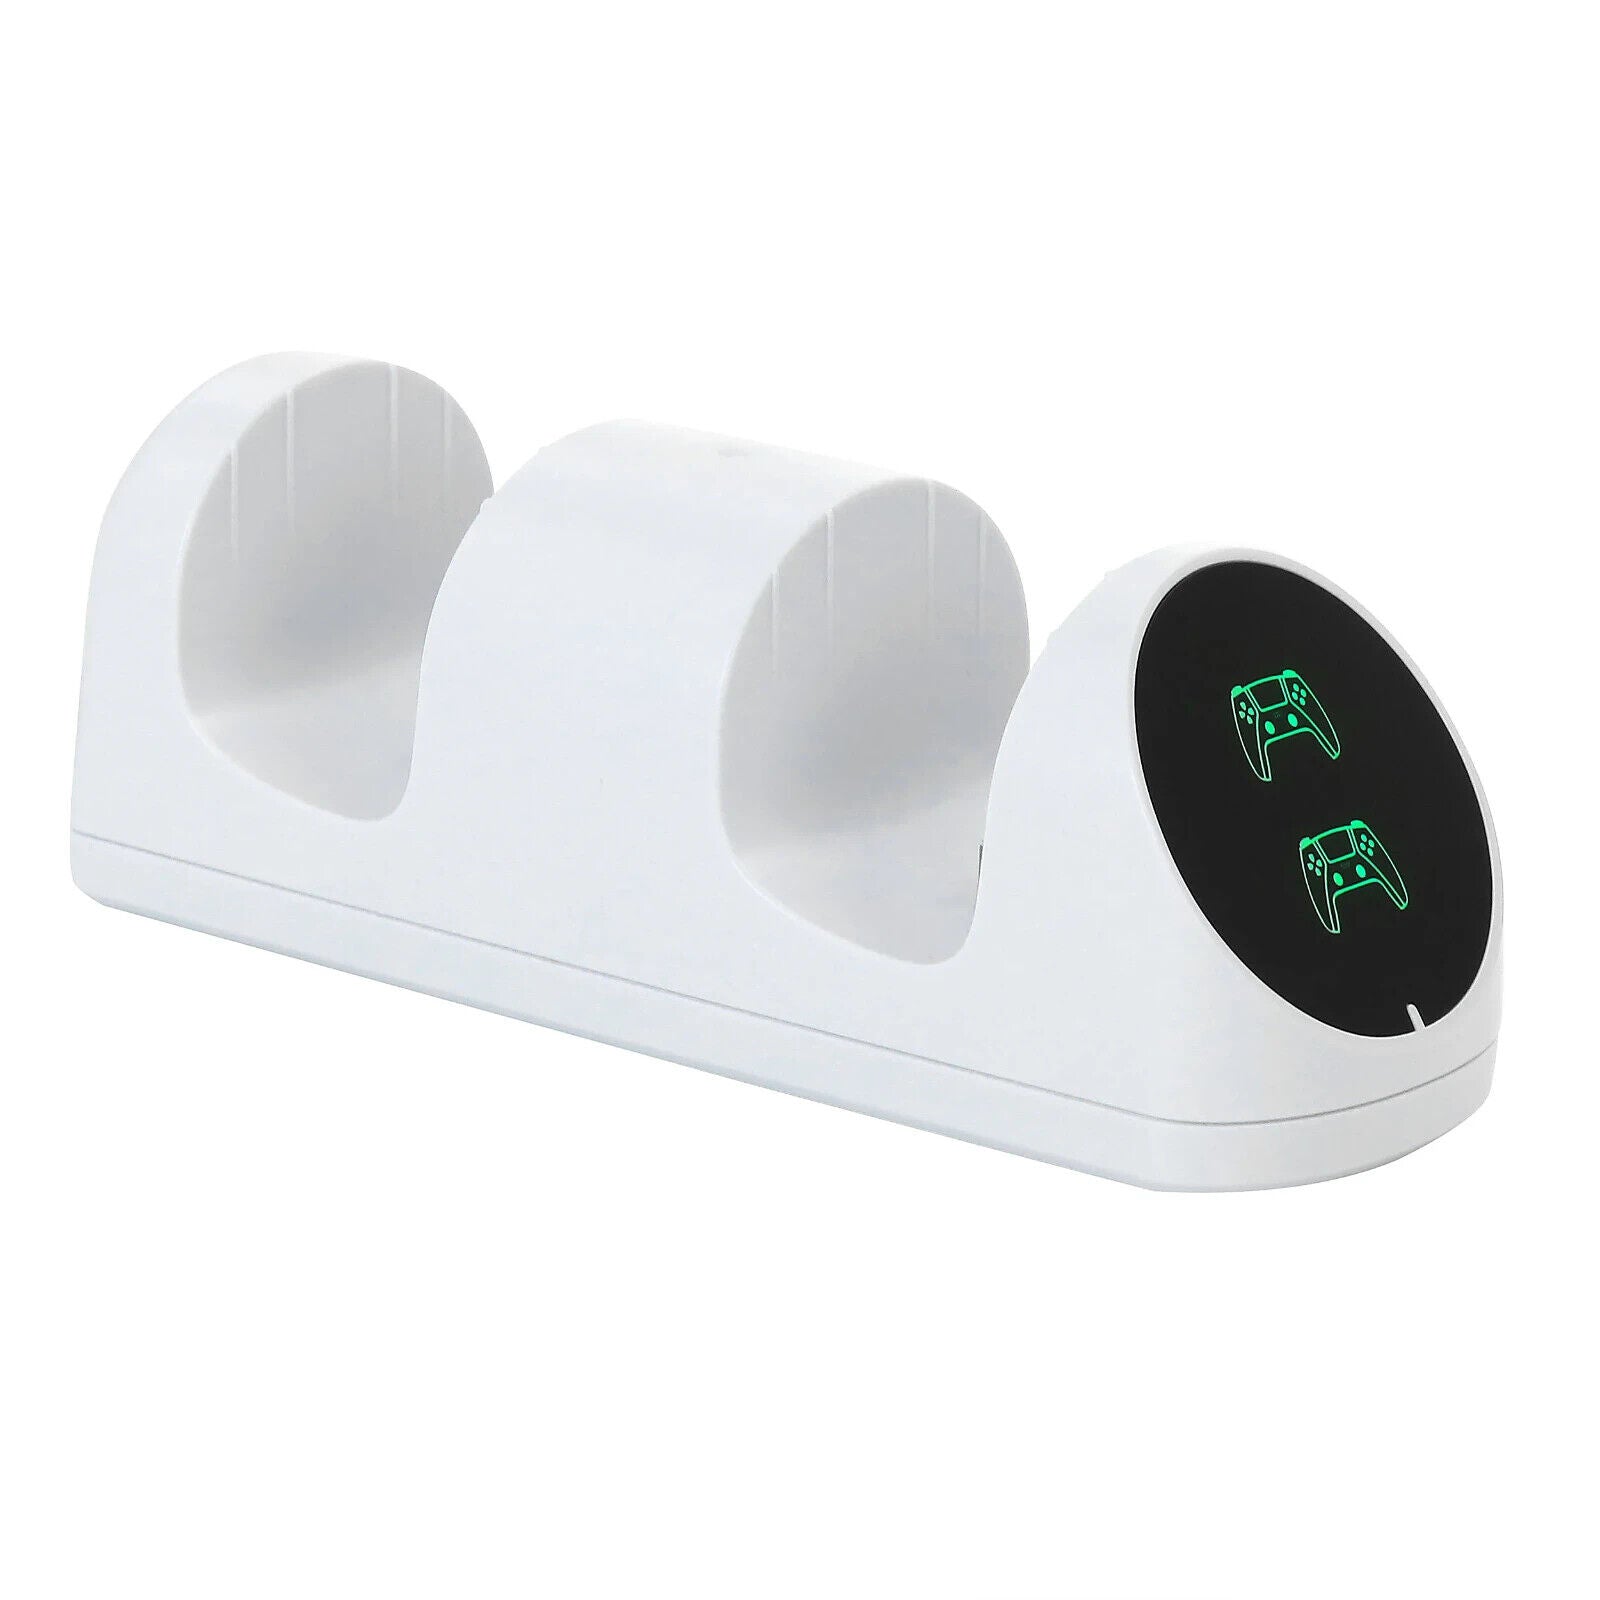 GameFitz Dual Charging Dock GF18-001 Store and Charge your Controller